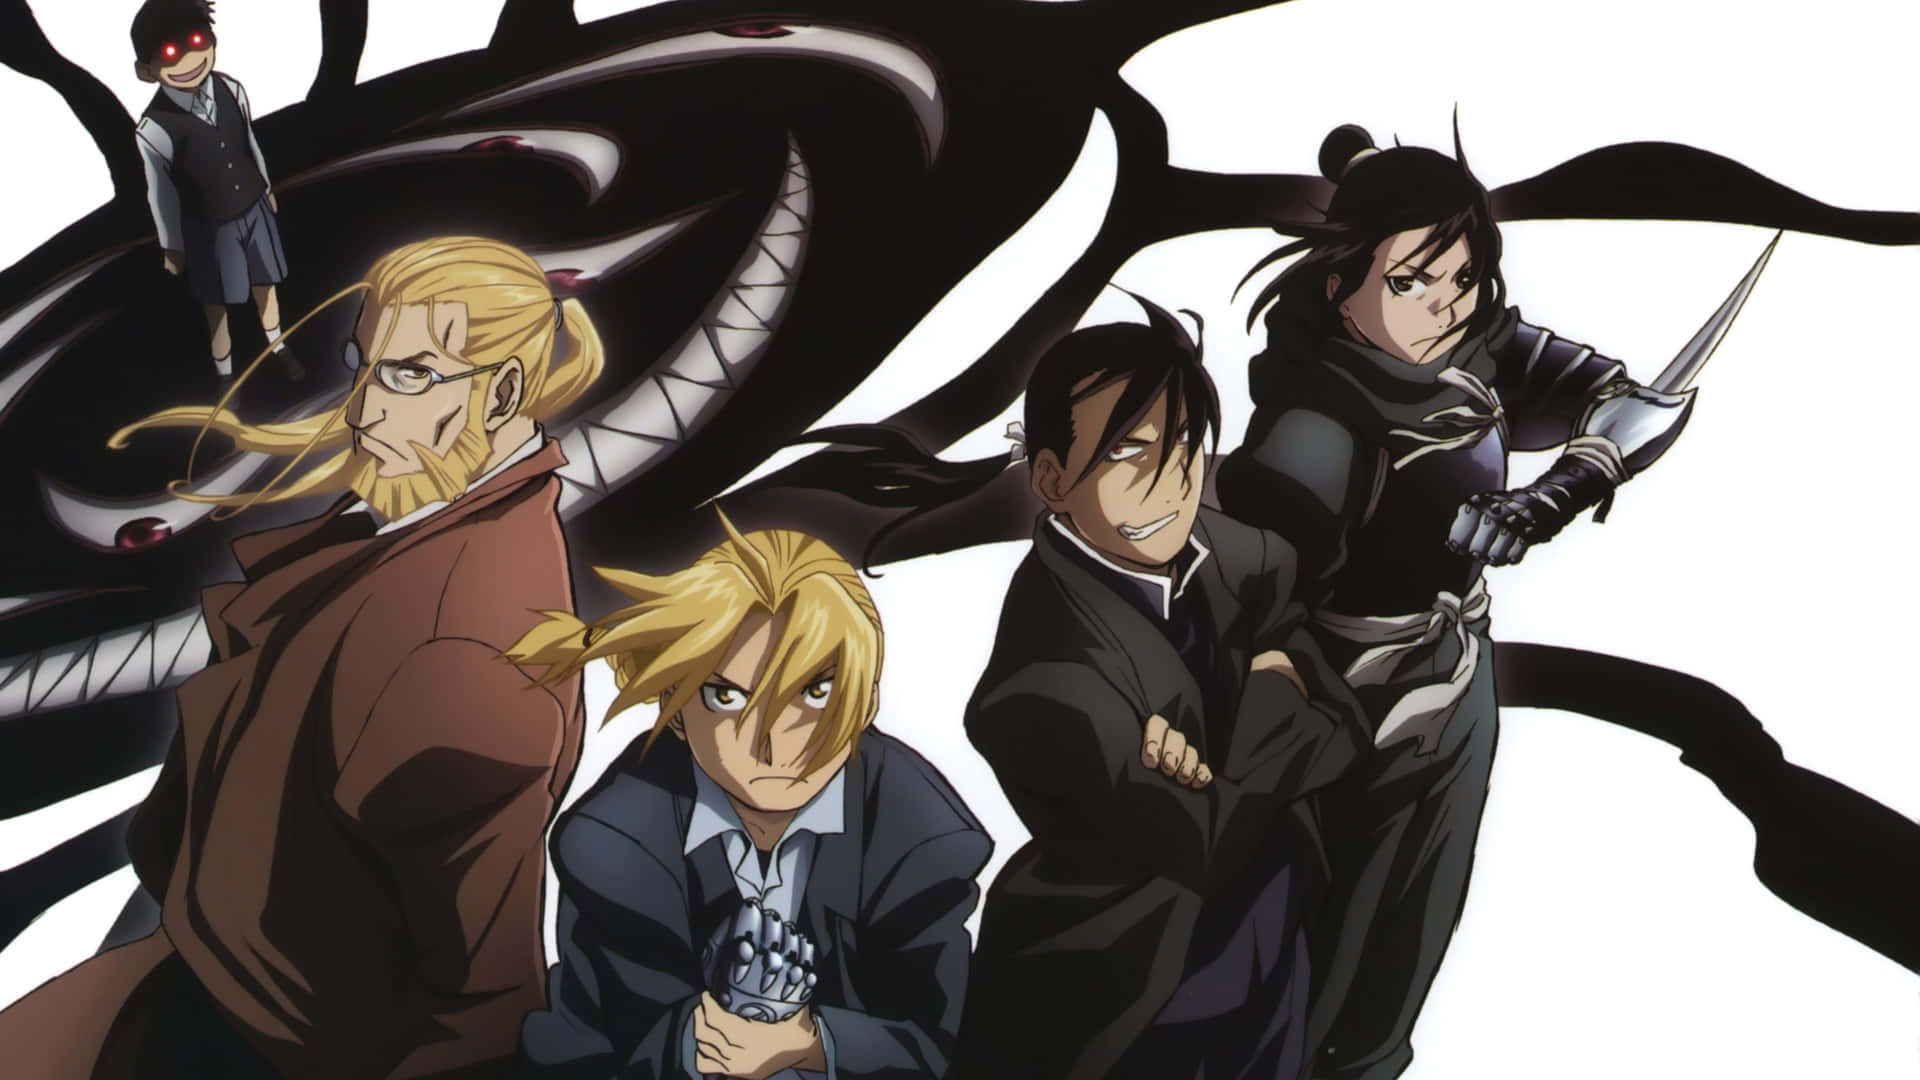 The passionate and ambitious Edward Elric and his brother Alphonse in the Fullmetal Alchemist Brotherhood